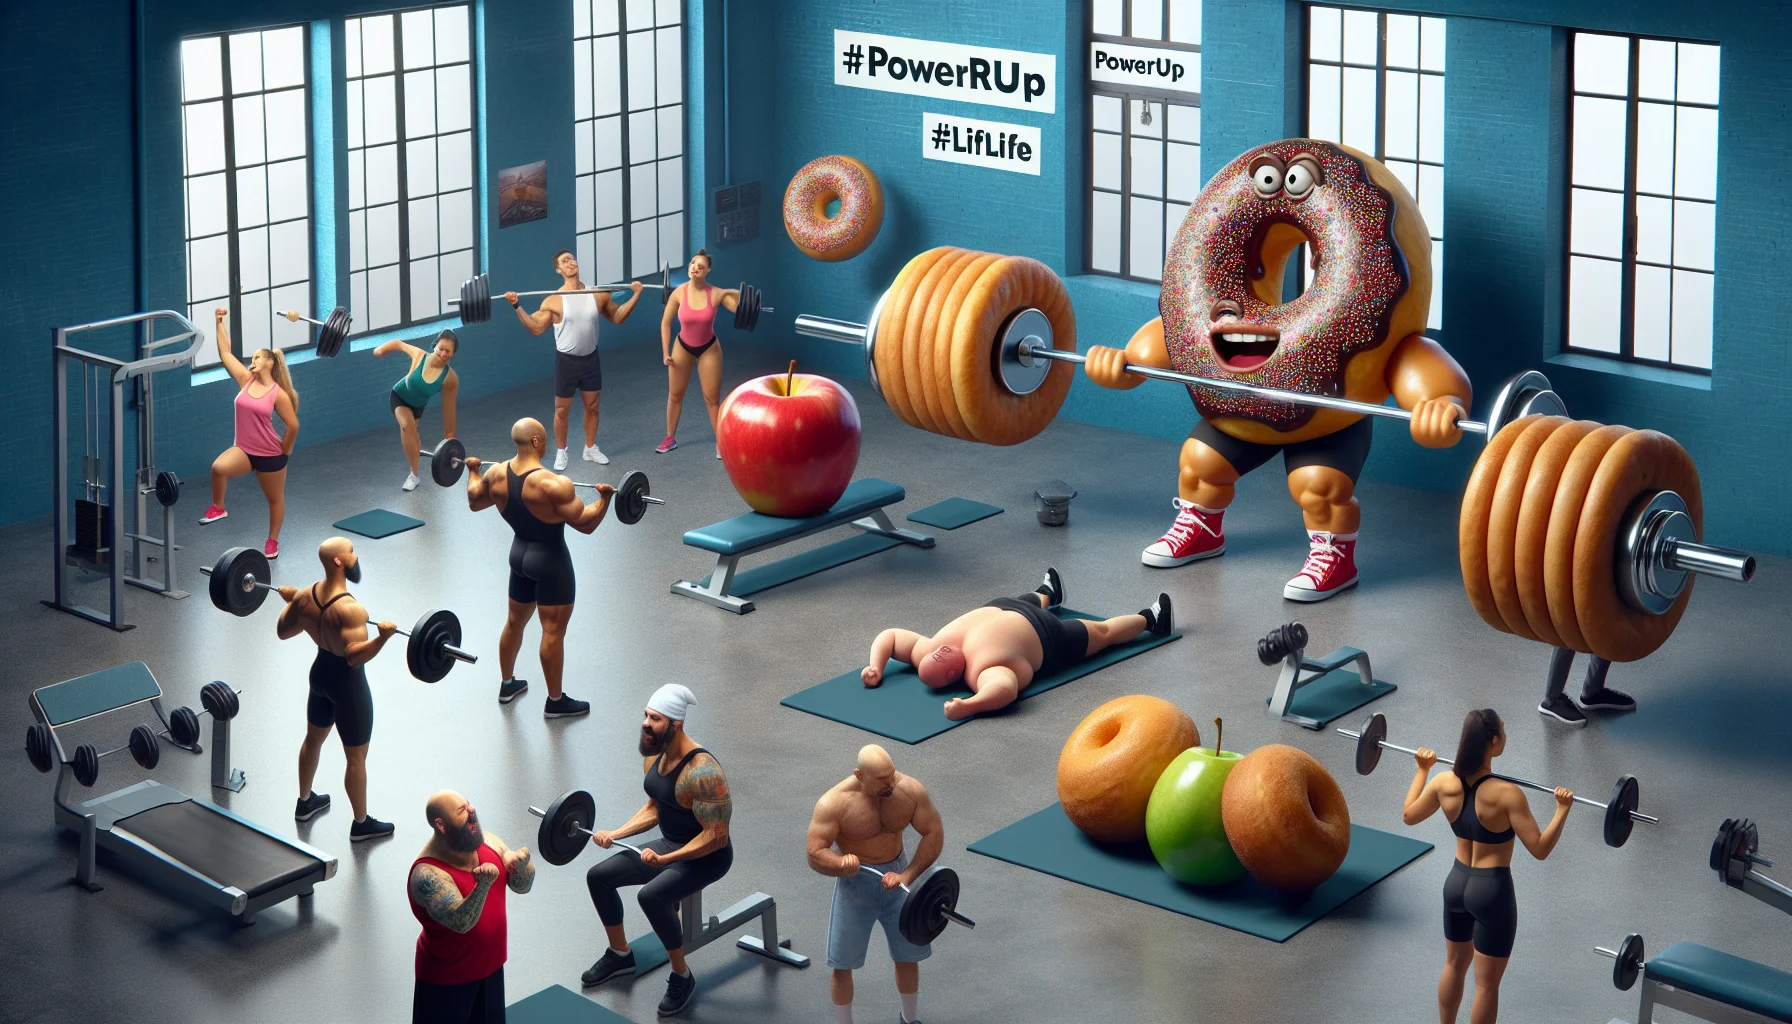 Create a comical, visually intriguing image that advocates for physical exercise through the context of powerlifting. The scenario could be a gymnasium where weights are humorously replaced by larger-than-life everyday objects, such as enormous doughnuts or gigantic apples. Imagine people of different genders and descents engaging in this humorous workout regime, with expressions of both determination and amusement on their faces. Spread throughout the image are the visualization of several powerlifting-related hashtags like '#PowerUp', '#LiftLife', and '#GymHumor', subtly encouraging viewers to take up exercise.